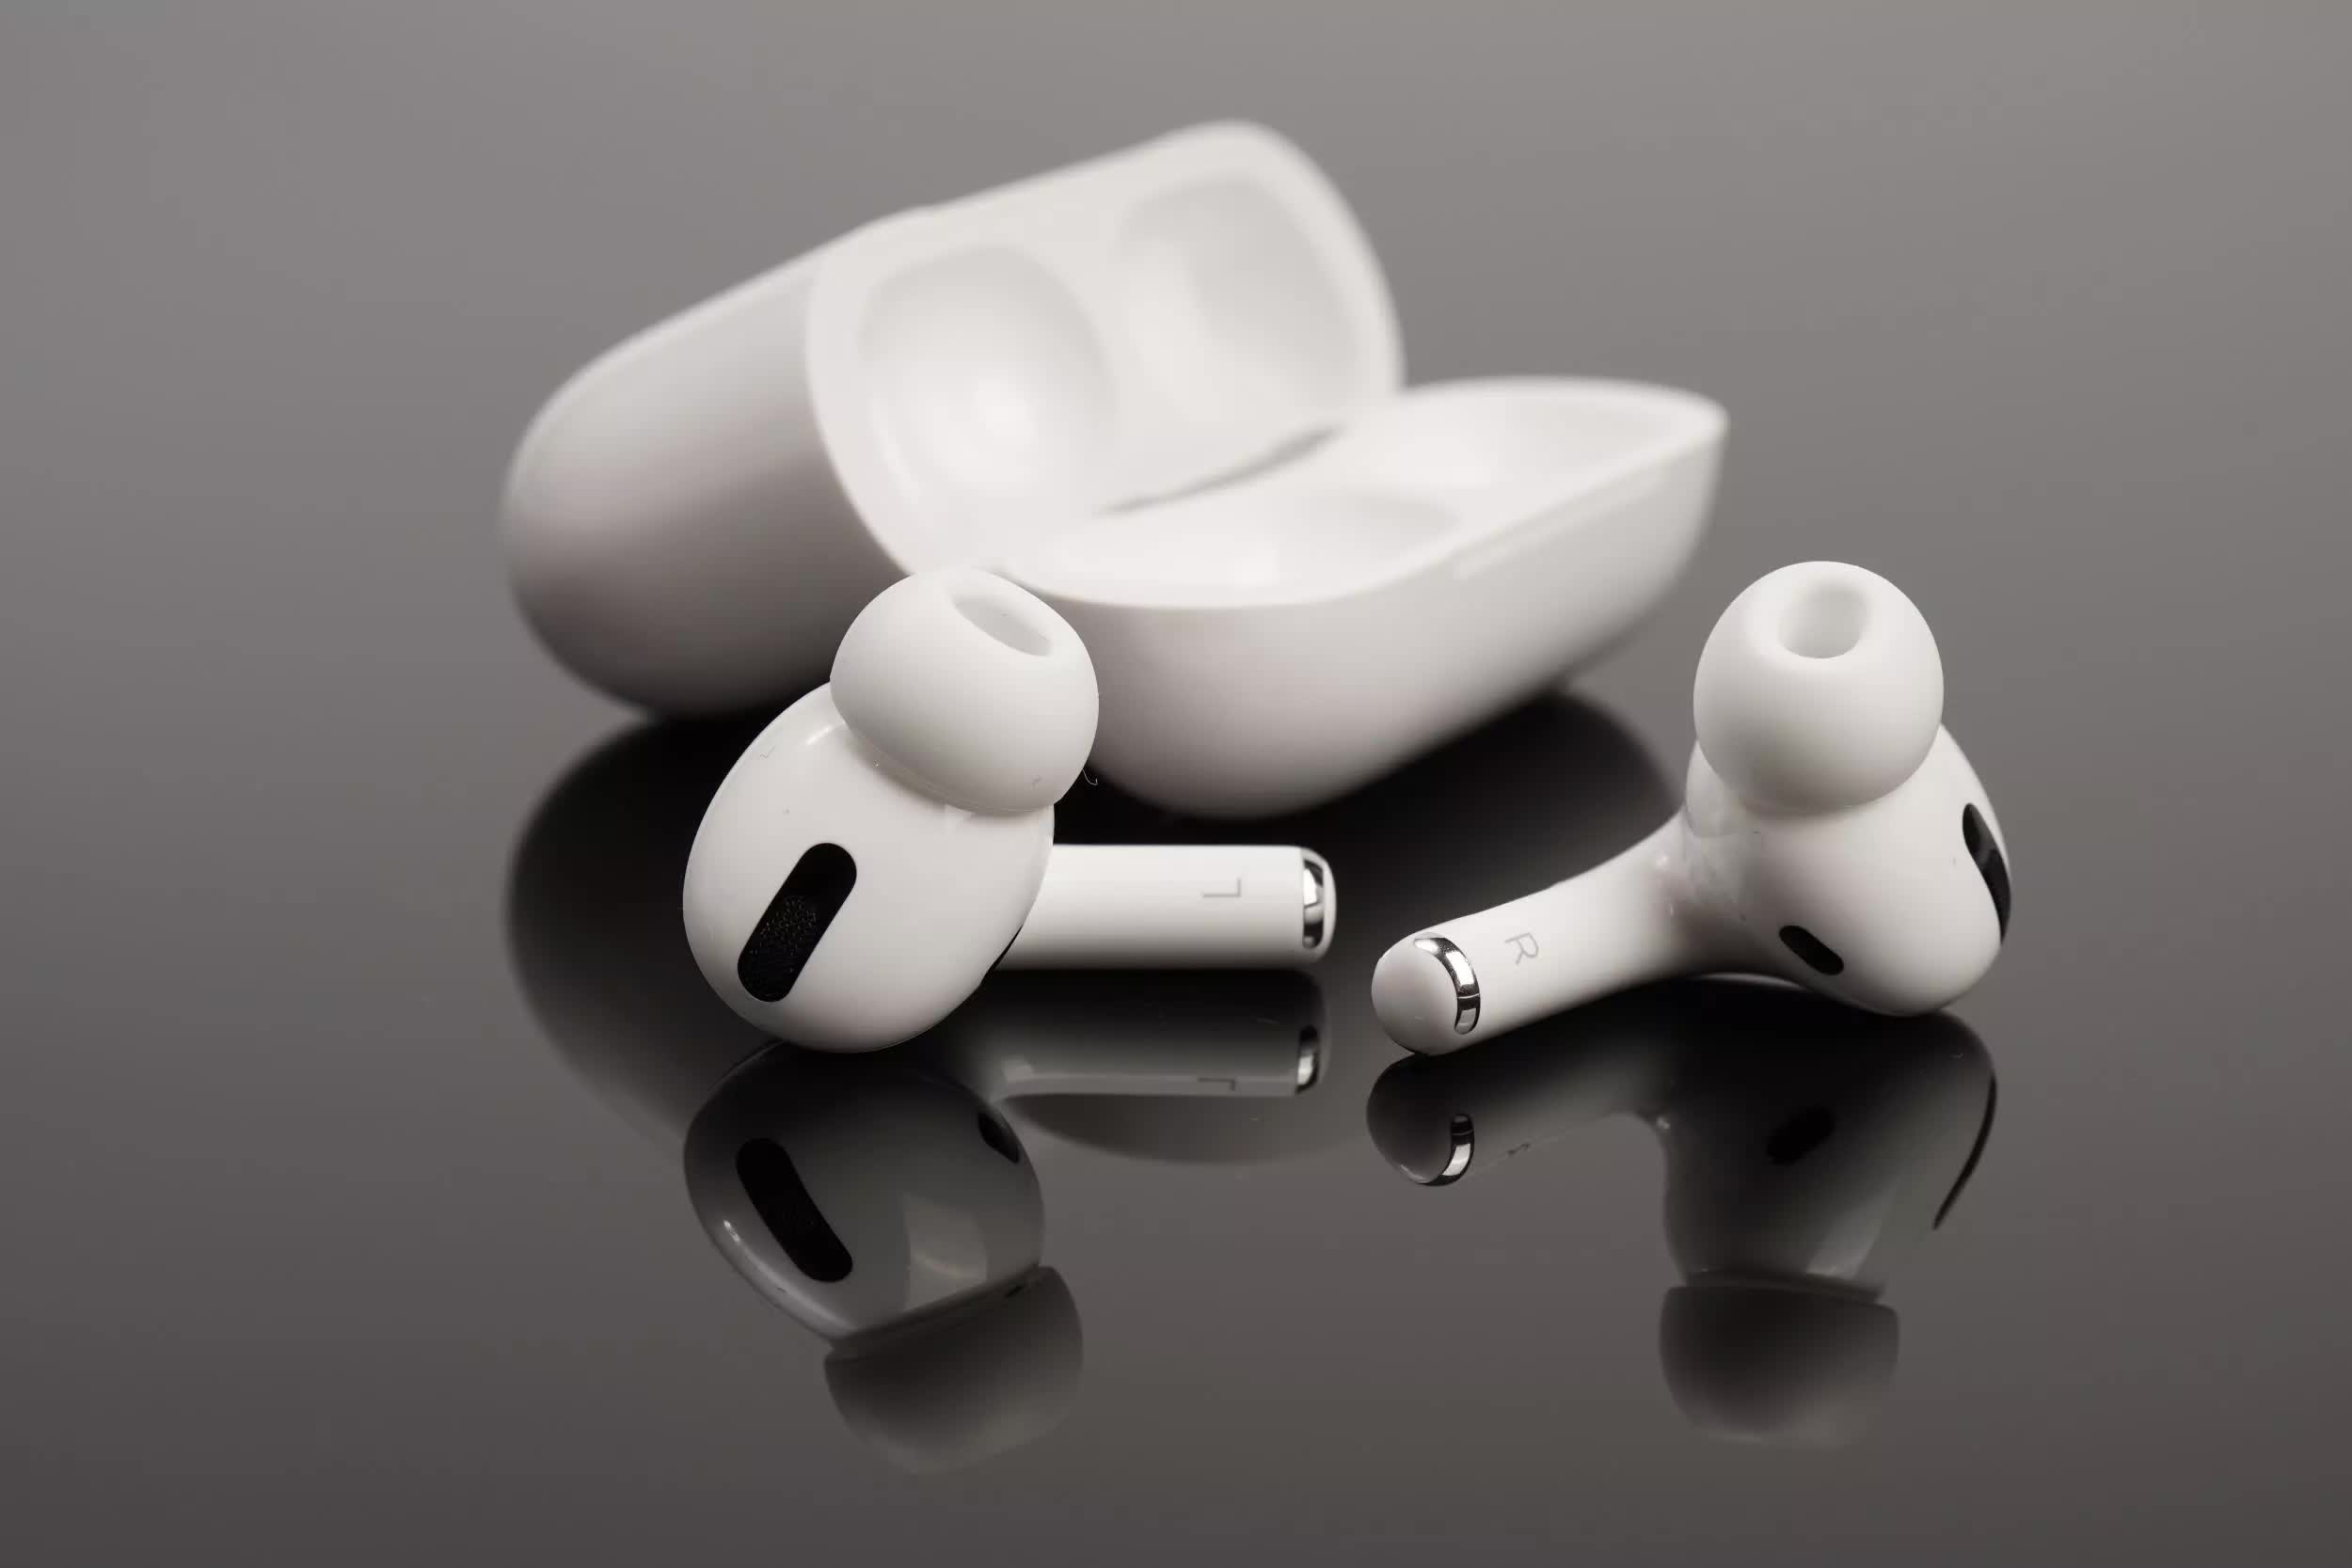 U.S. customs has seized over 360,000 fake AirPods in 2021 alone